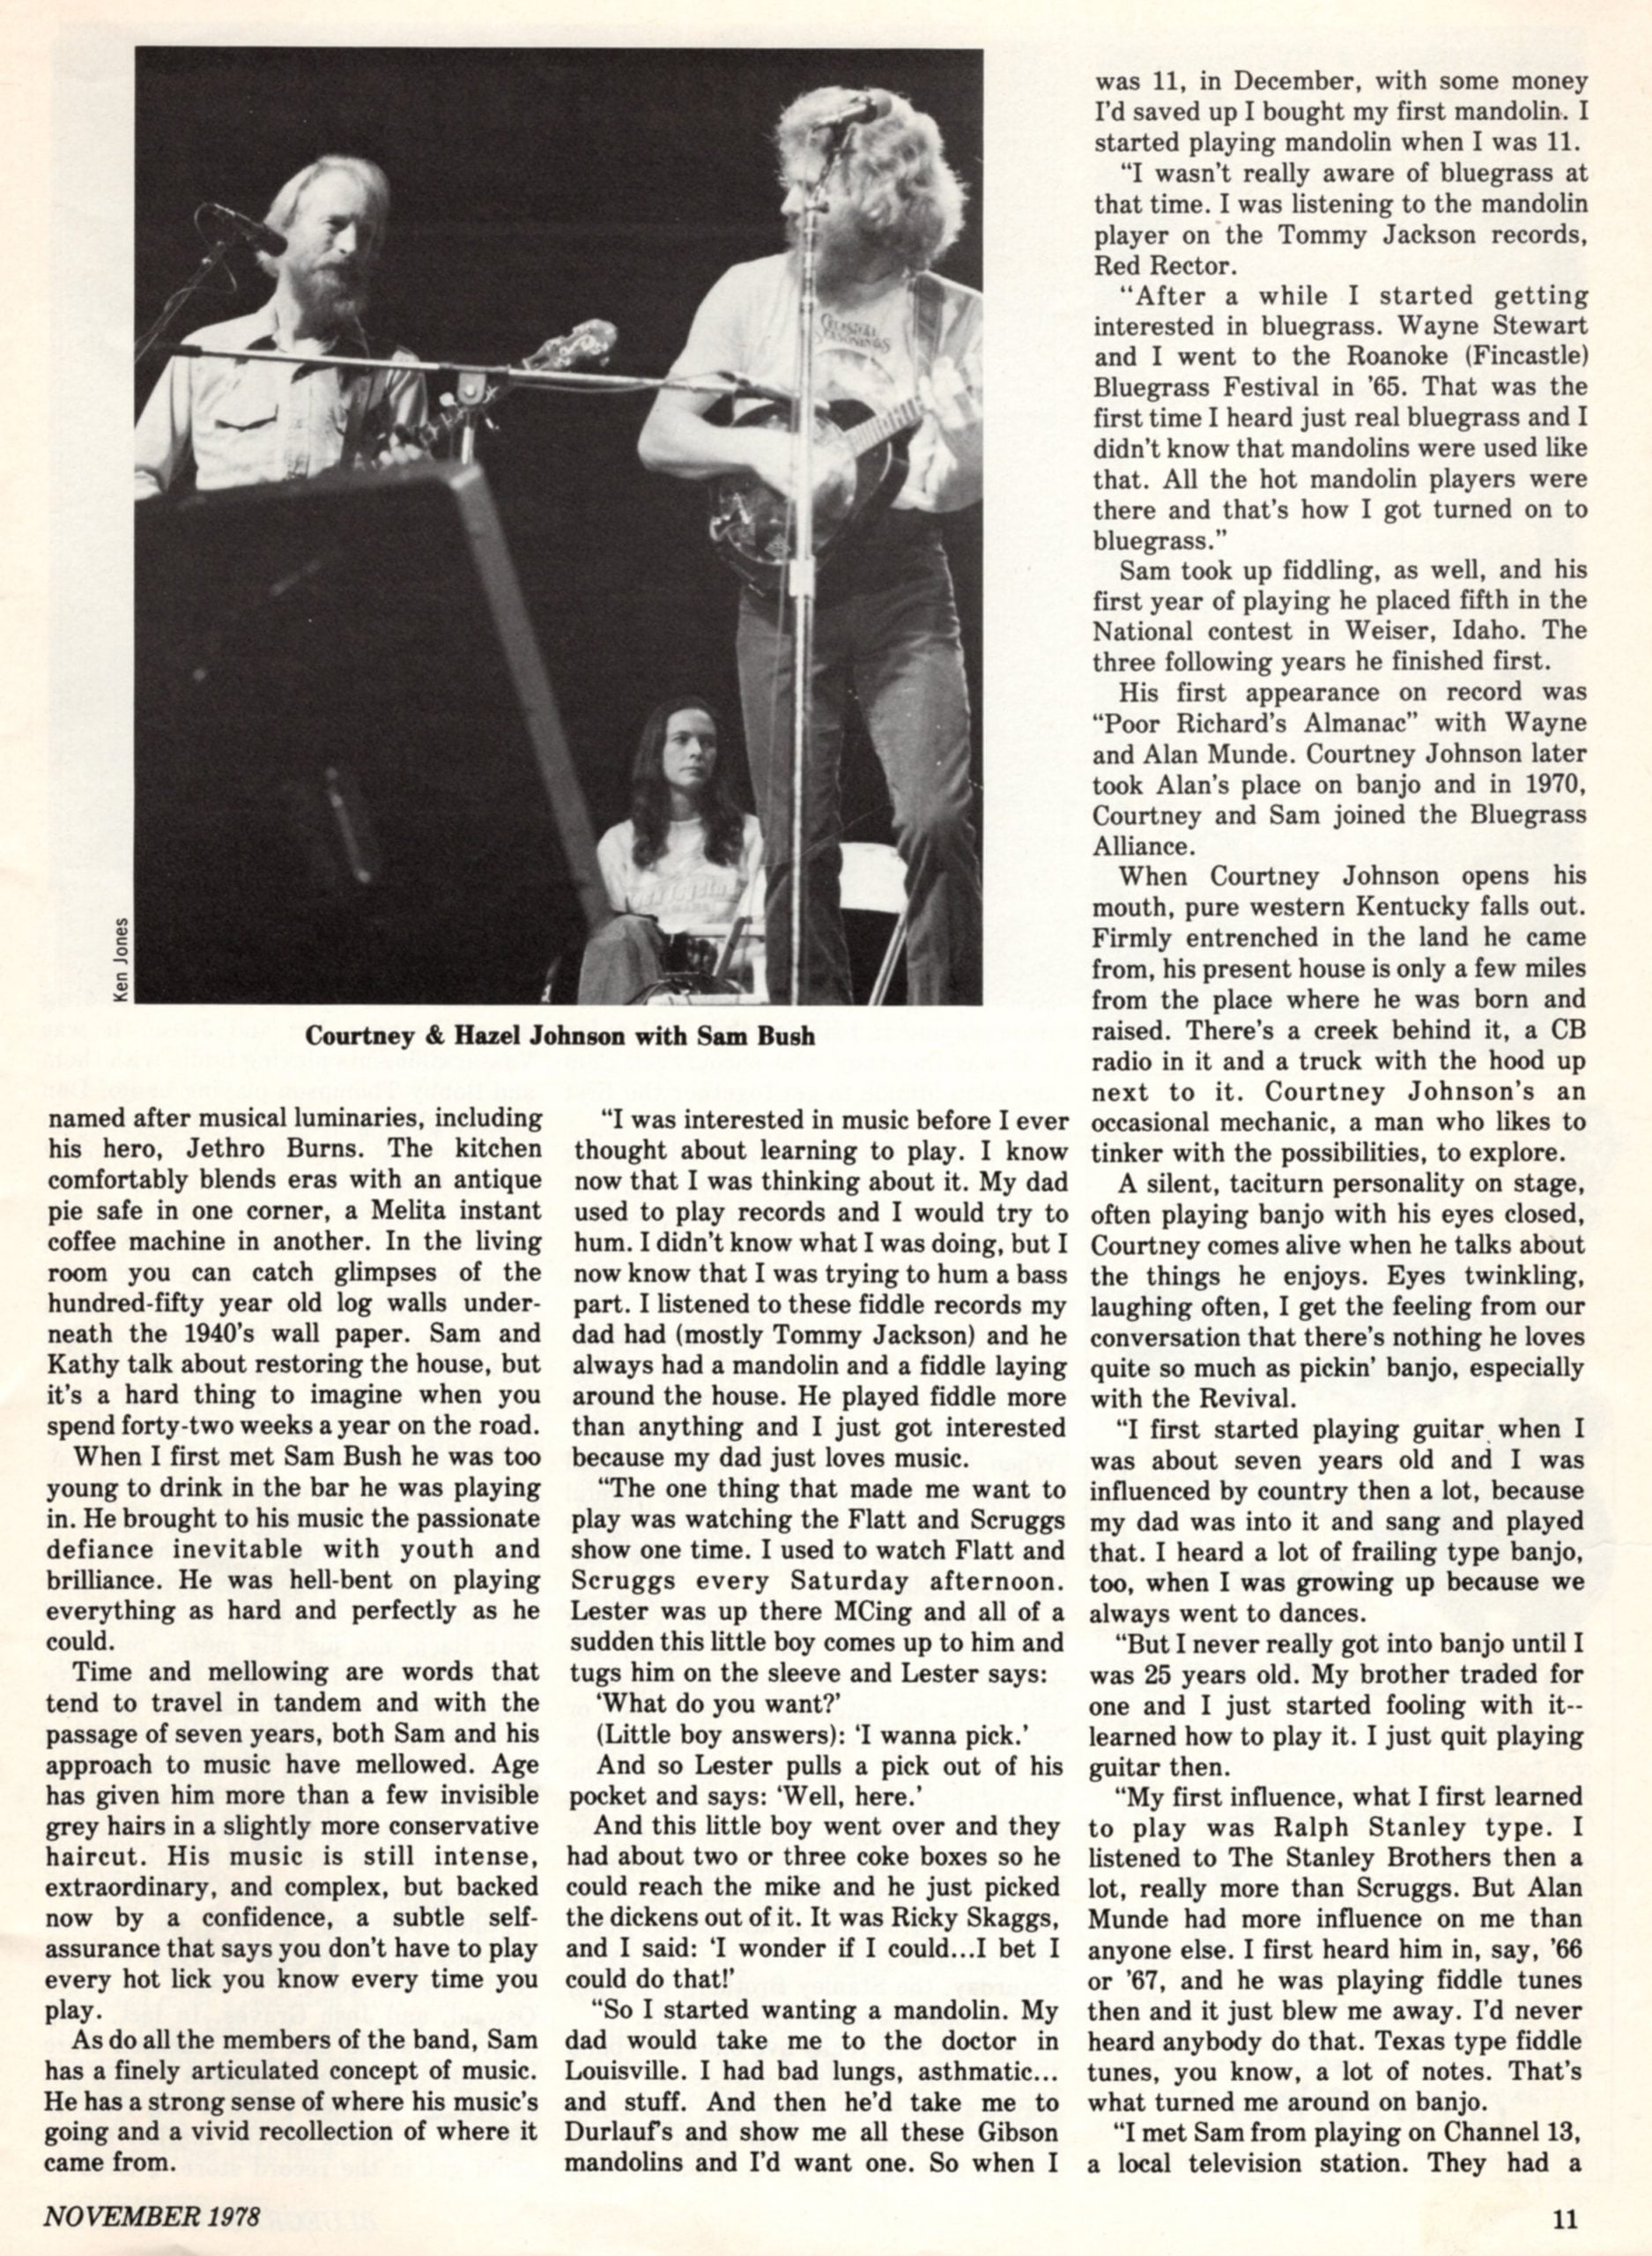 Clipping from an original Bluegrass Unlimited magazine